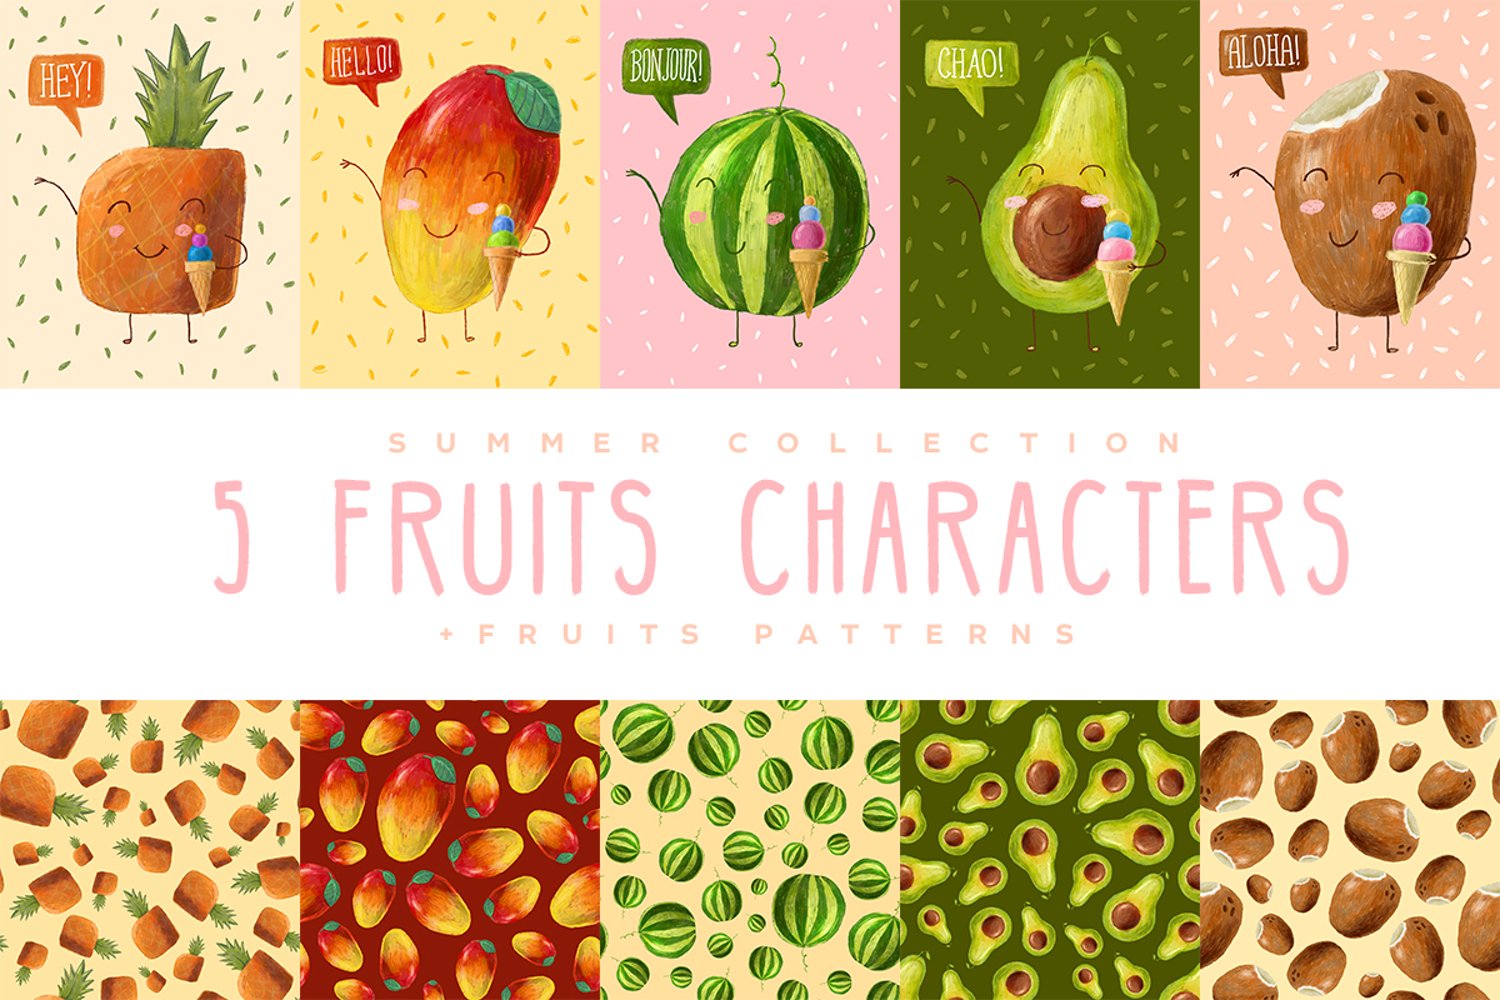 Cover image of Cute smiling fruit characters with ice-cream and patterns.